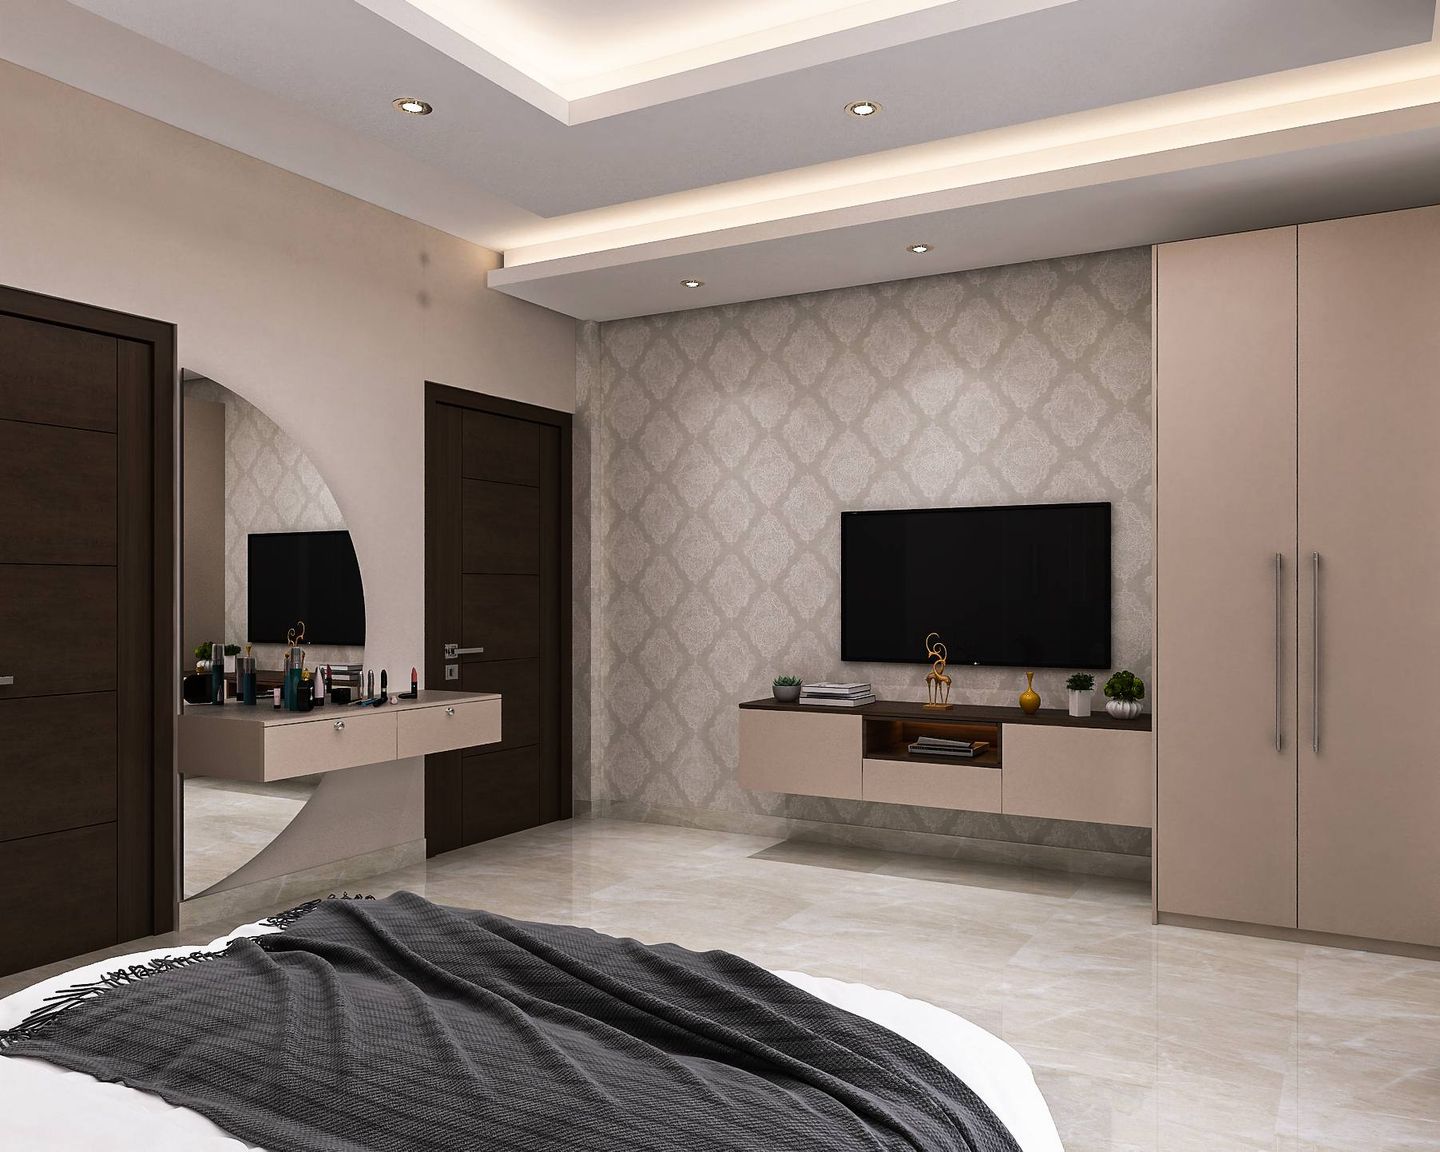 Modern Master Bedroom Design With White Wall Trims